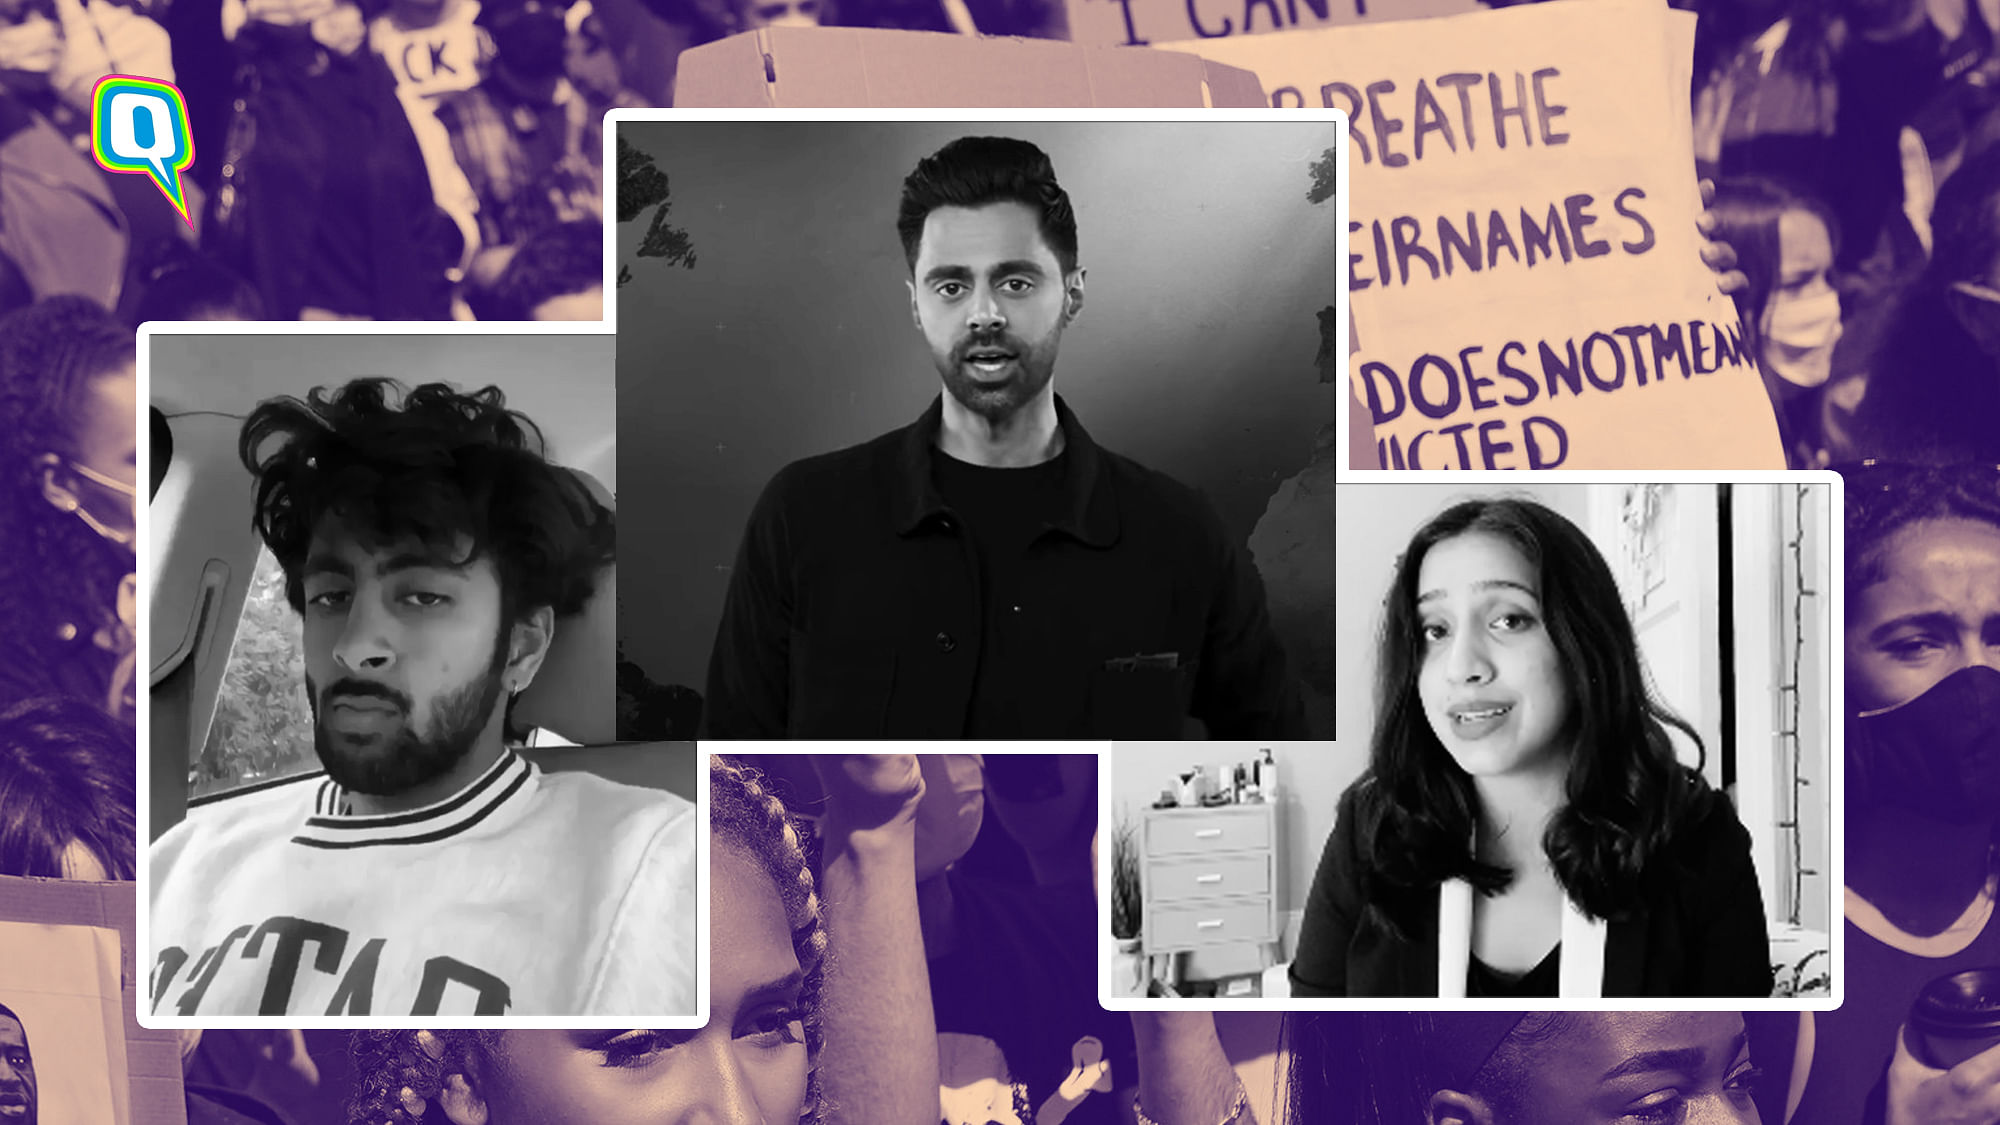 South Asians are finally speaking up in support of the Black Lives Matter movement.